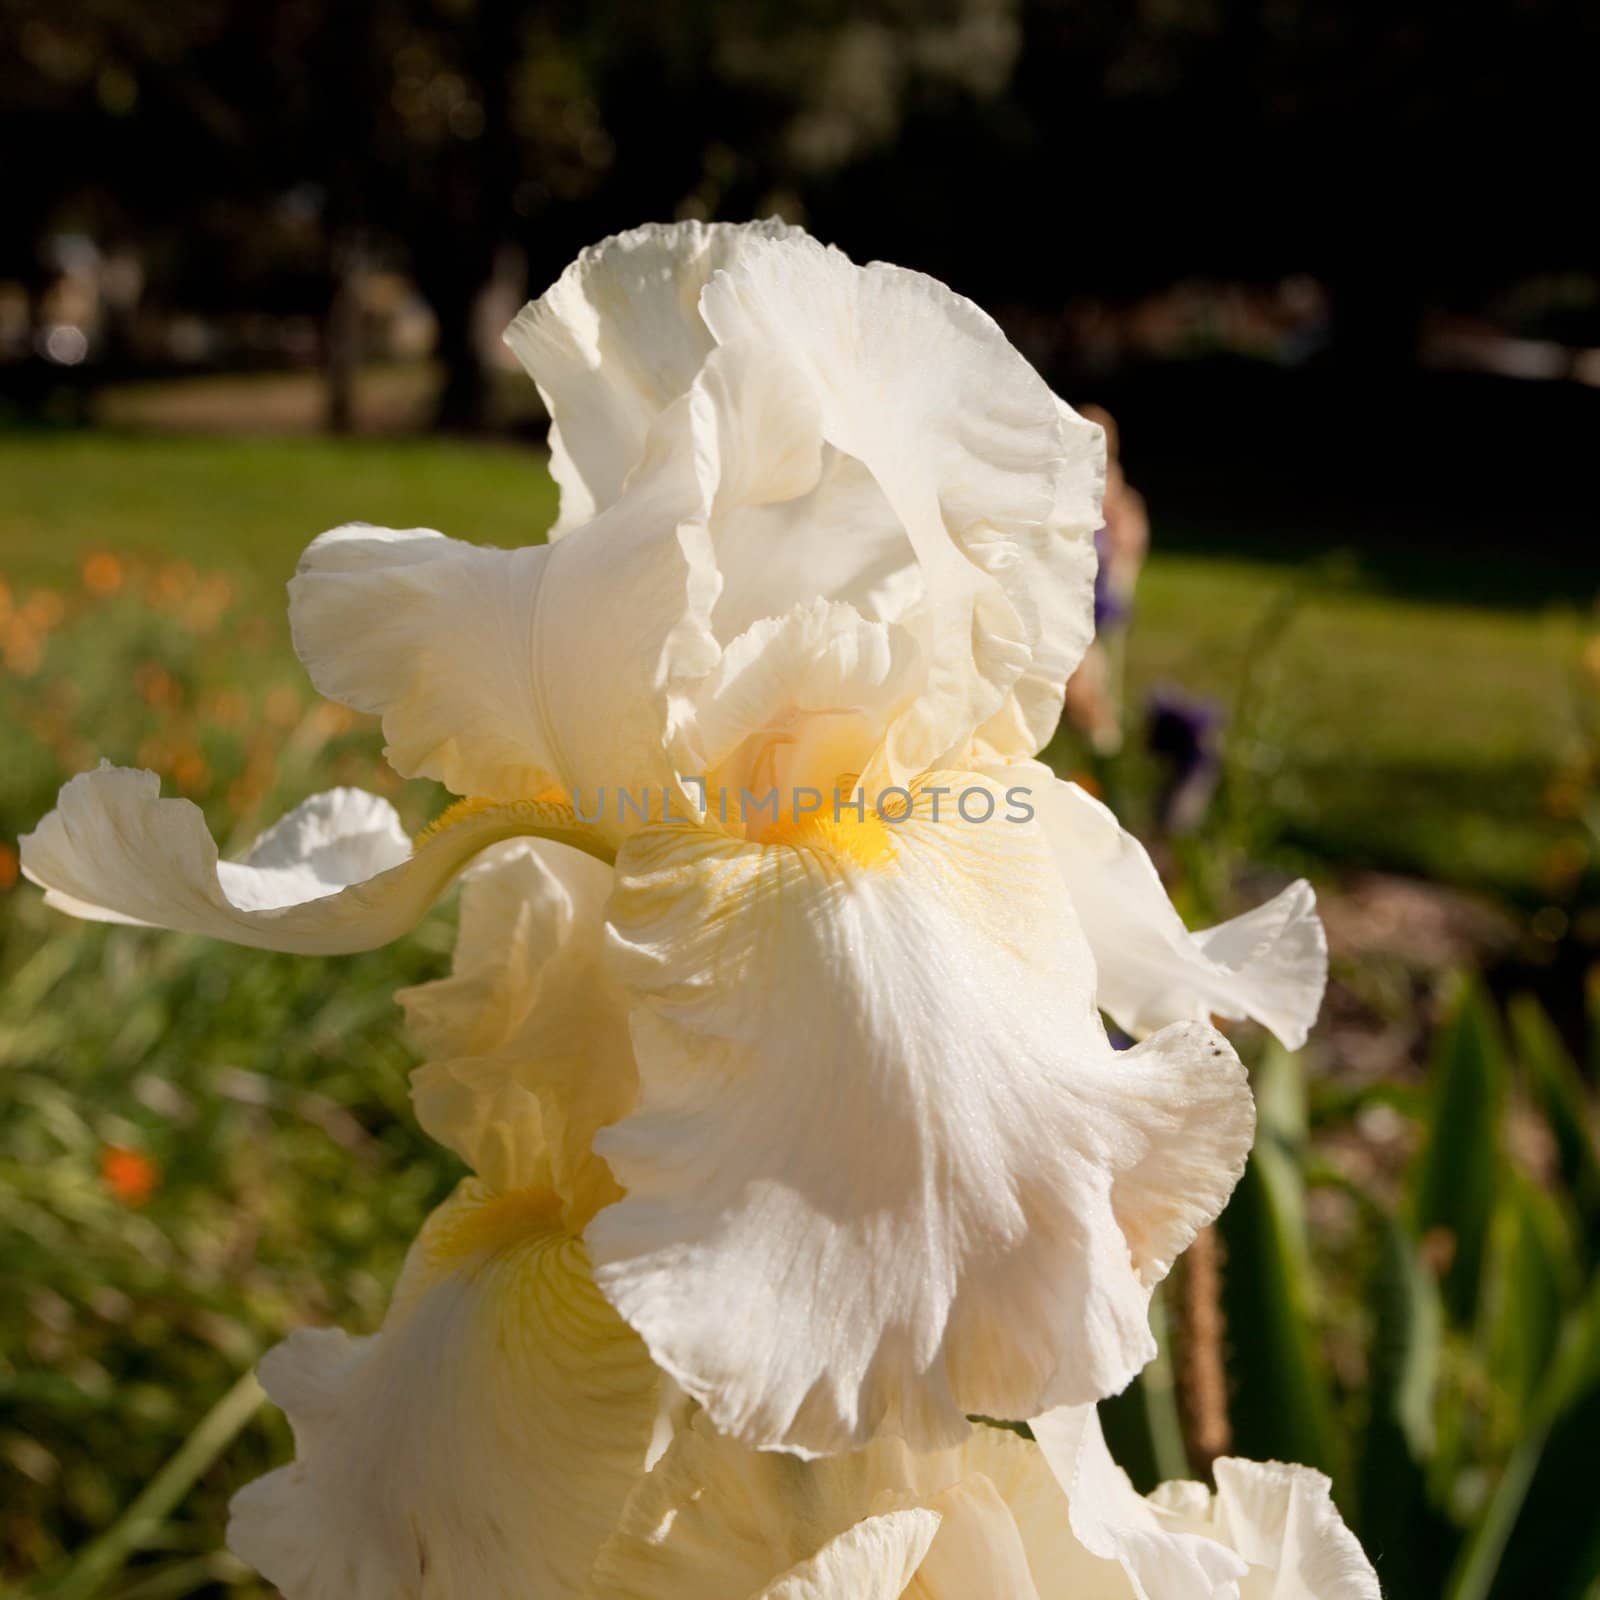 Iris is a genus of between 200-300 species of flowering plants with showy flowers. It takes its name from the Greek word for a rainbow, referring to the wide variety of flower colors found among the many species.